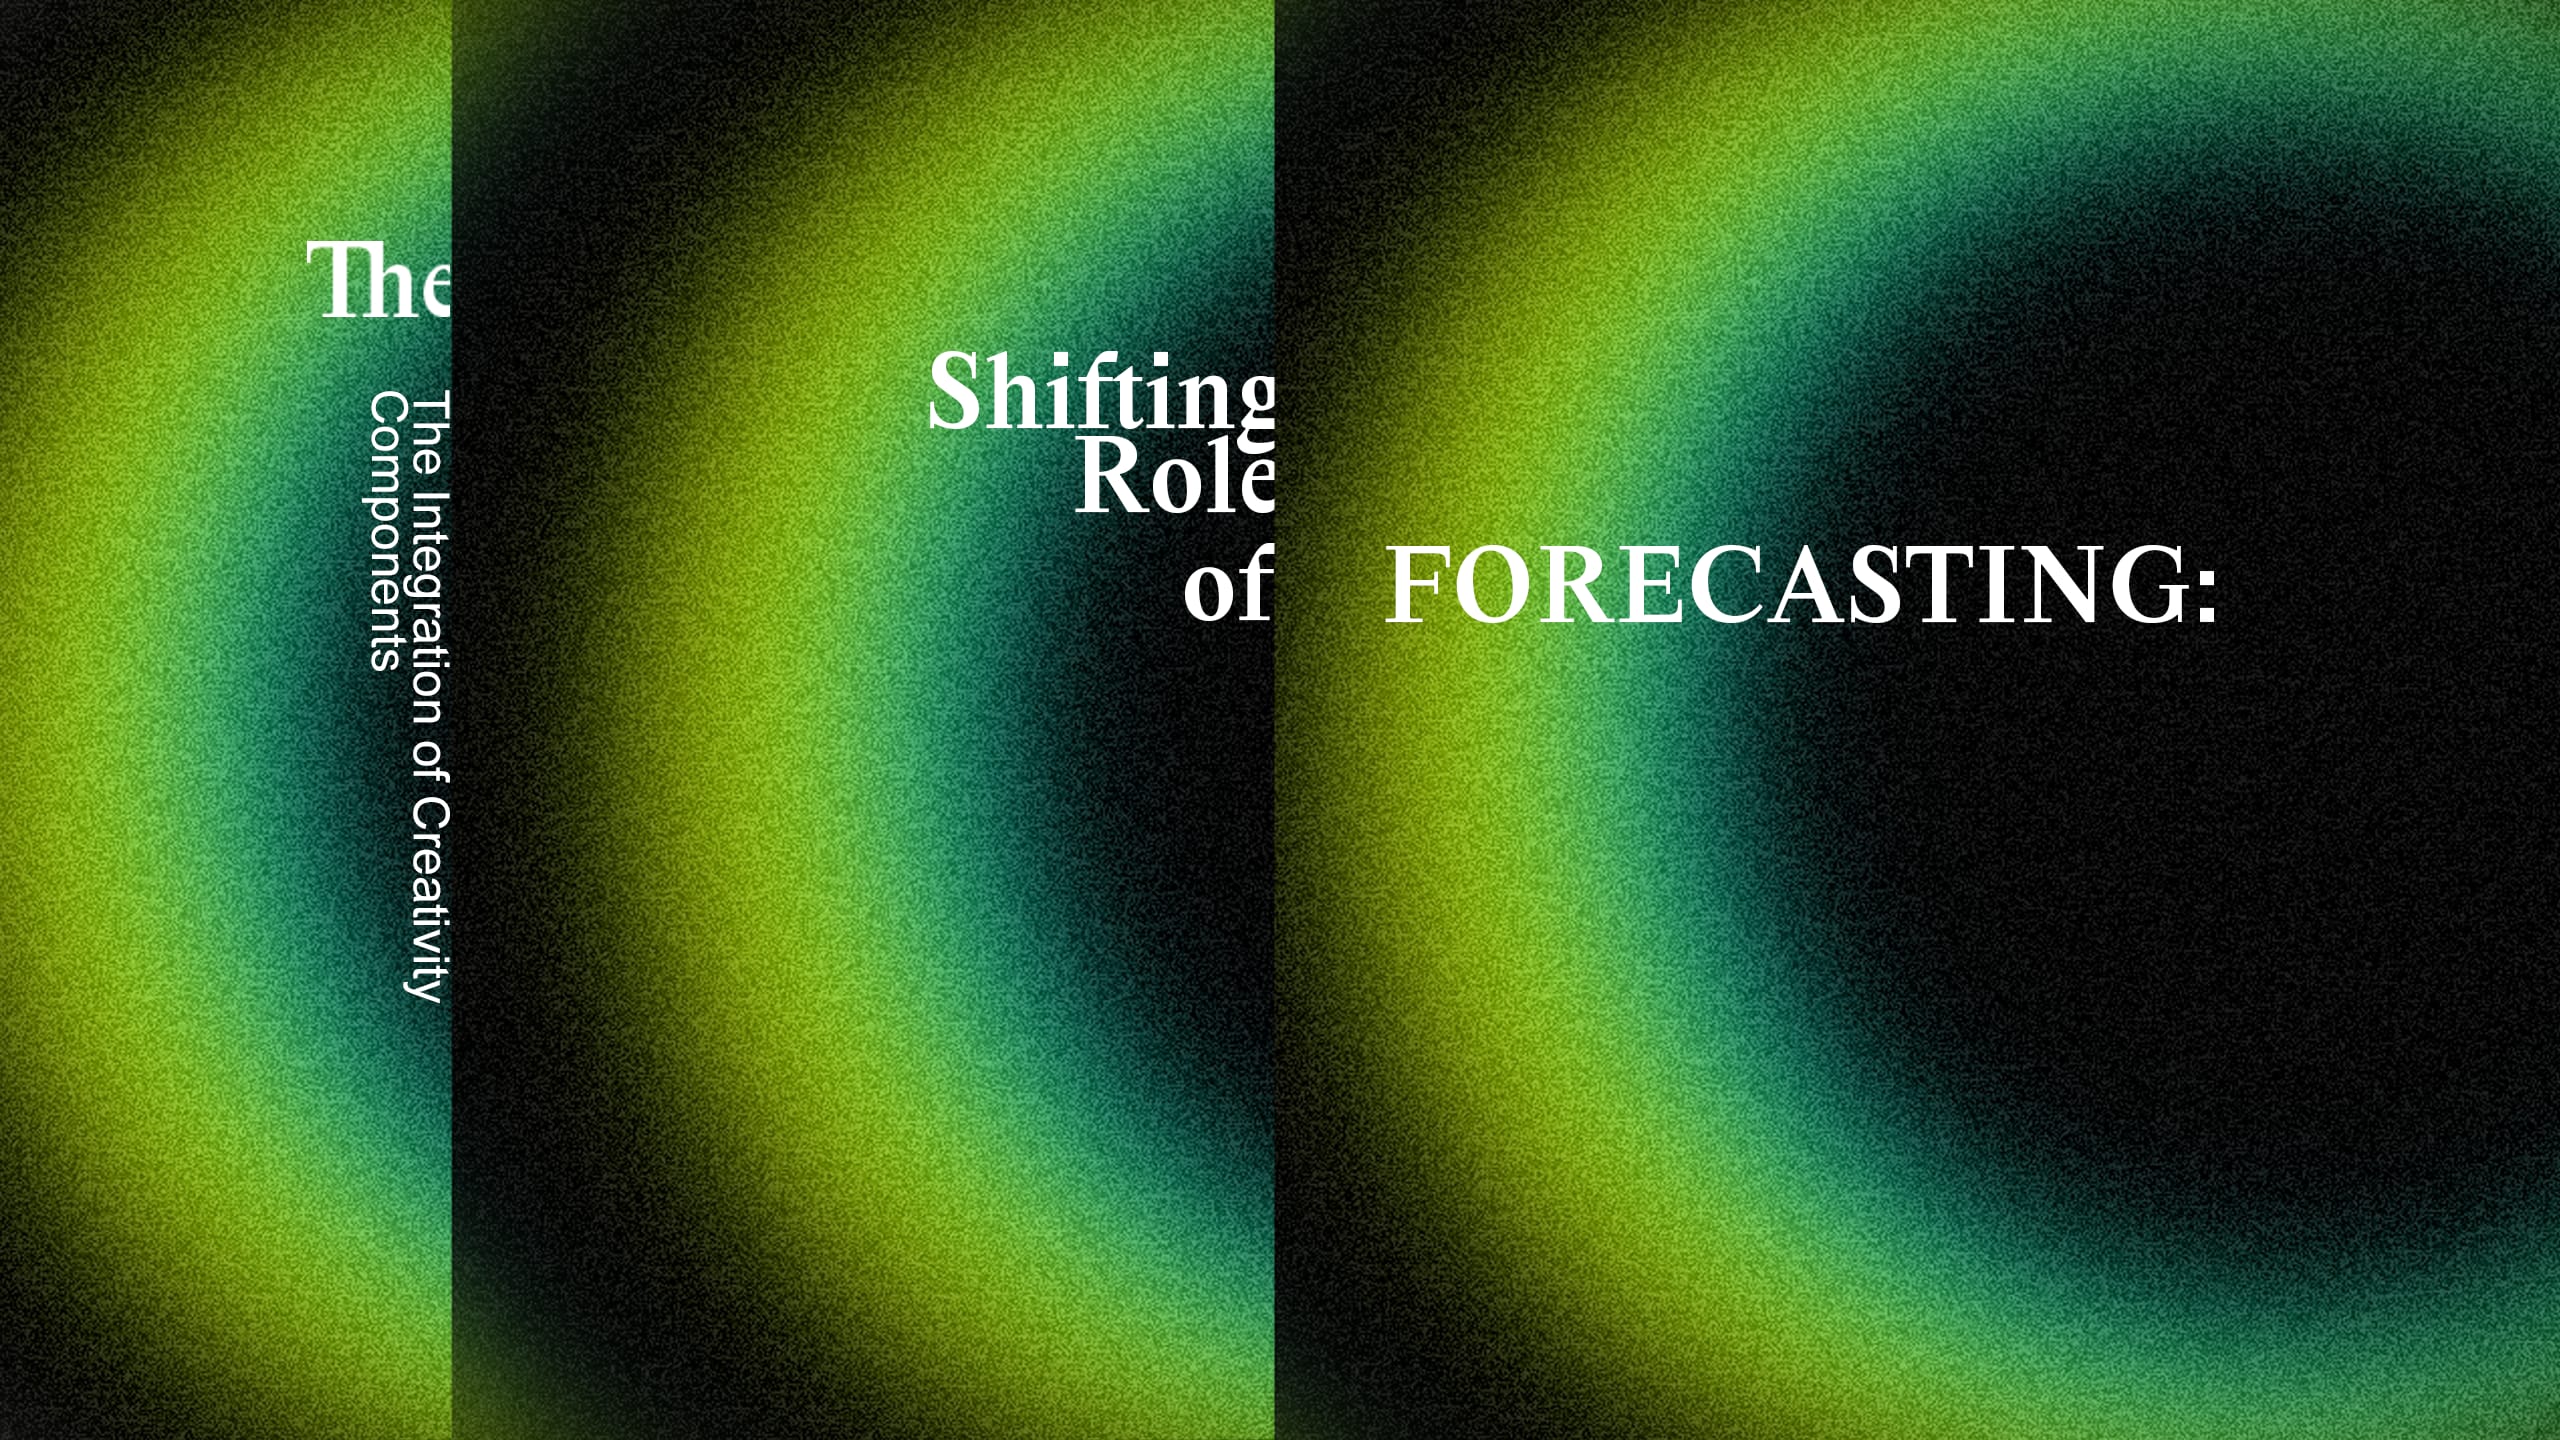 The Shifting Role of Forecasting